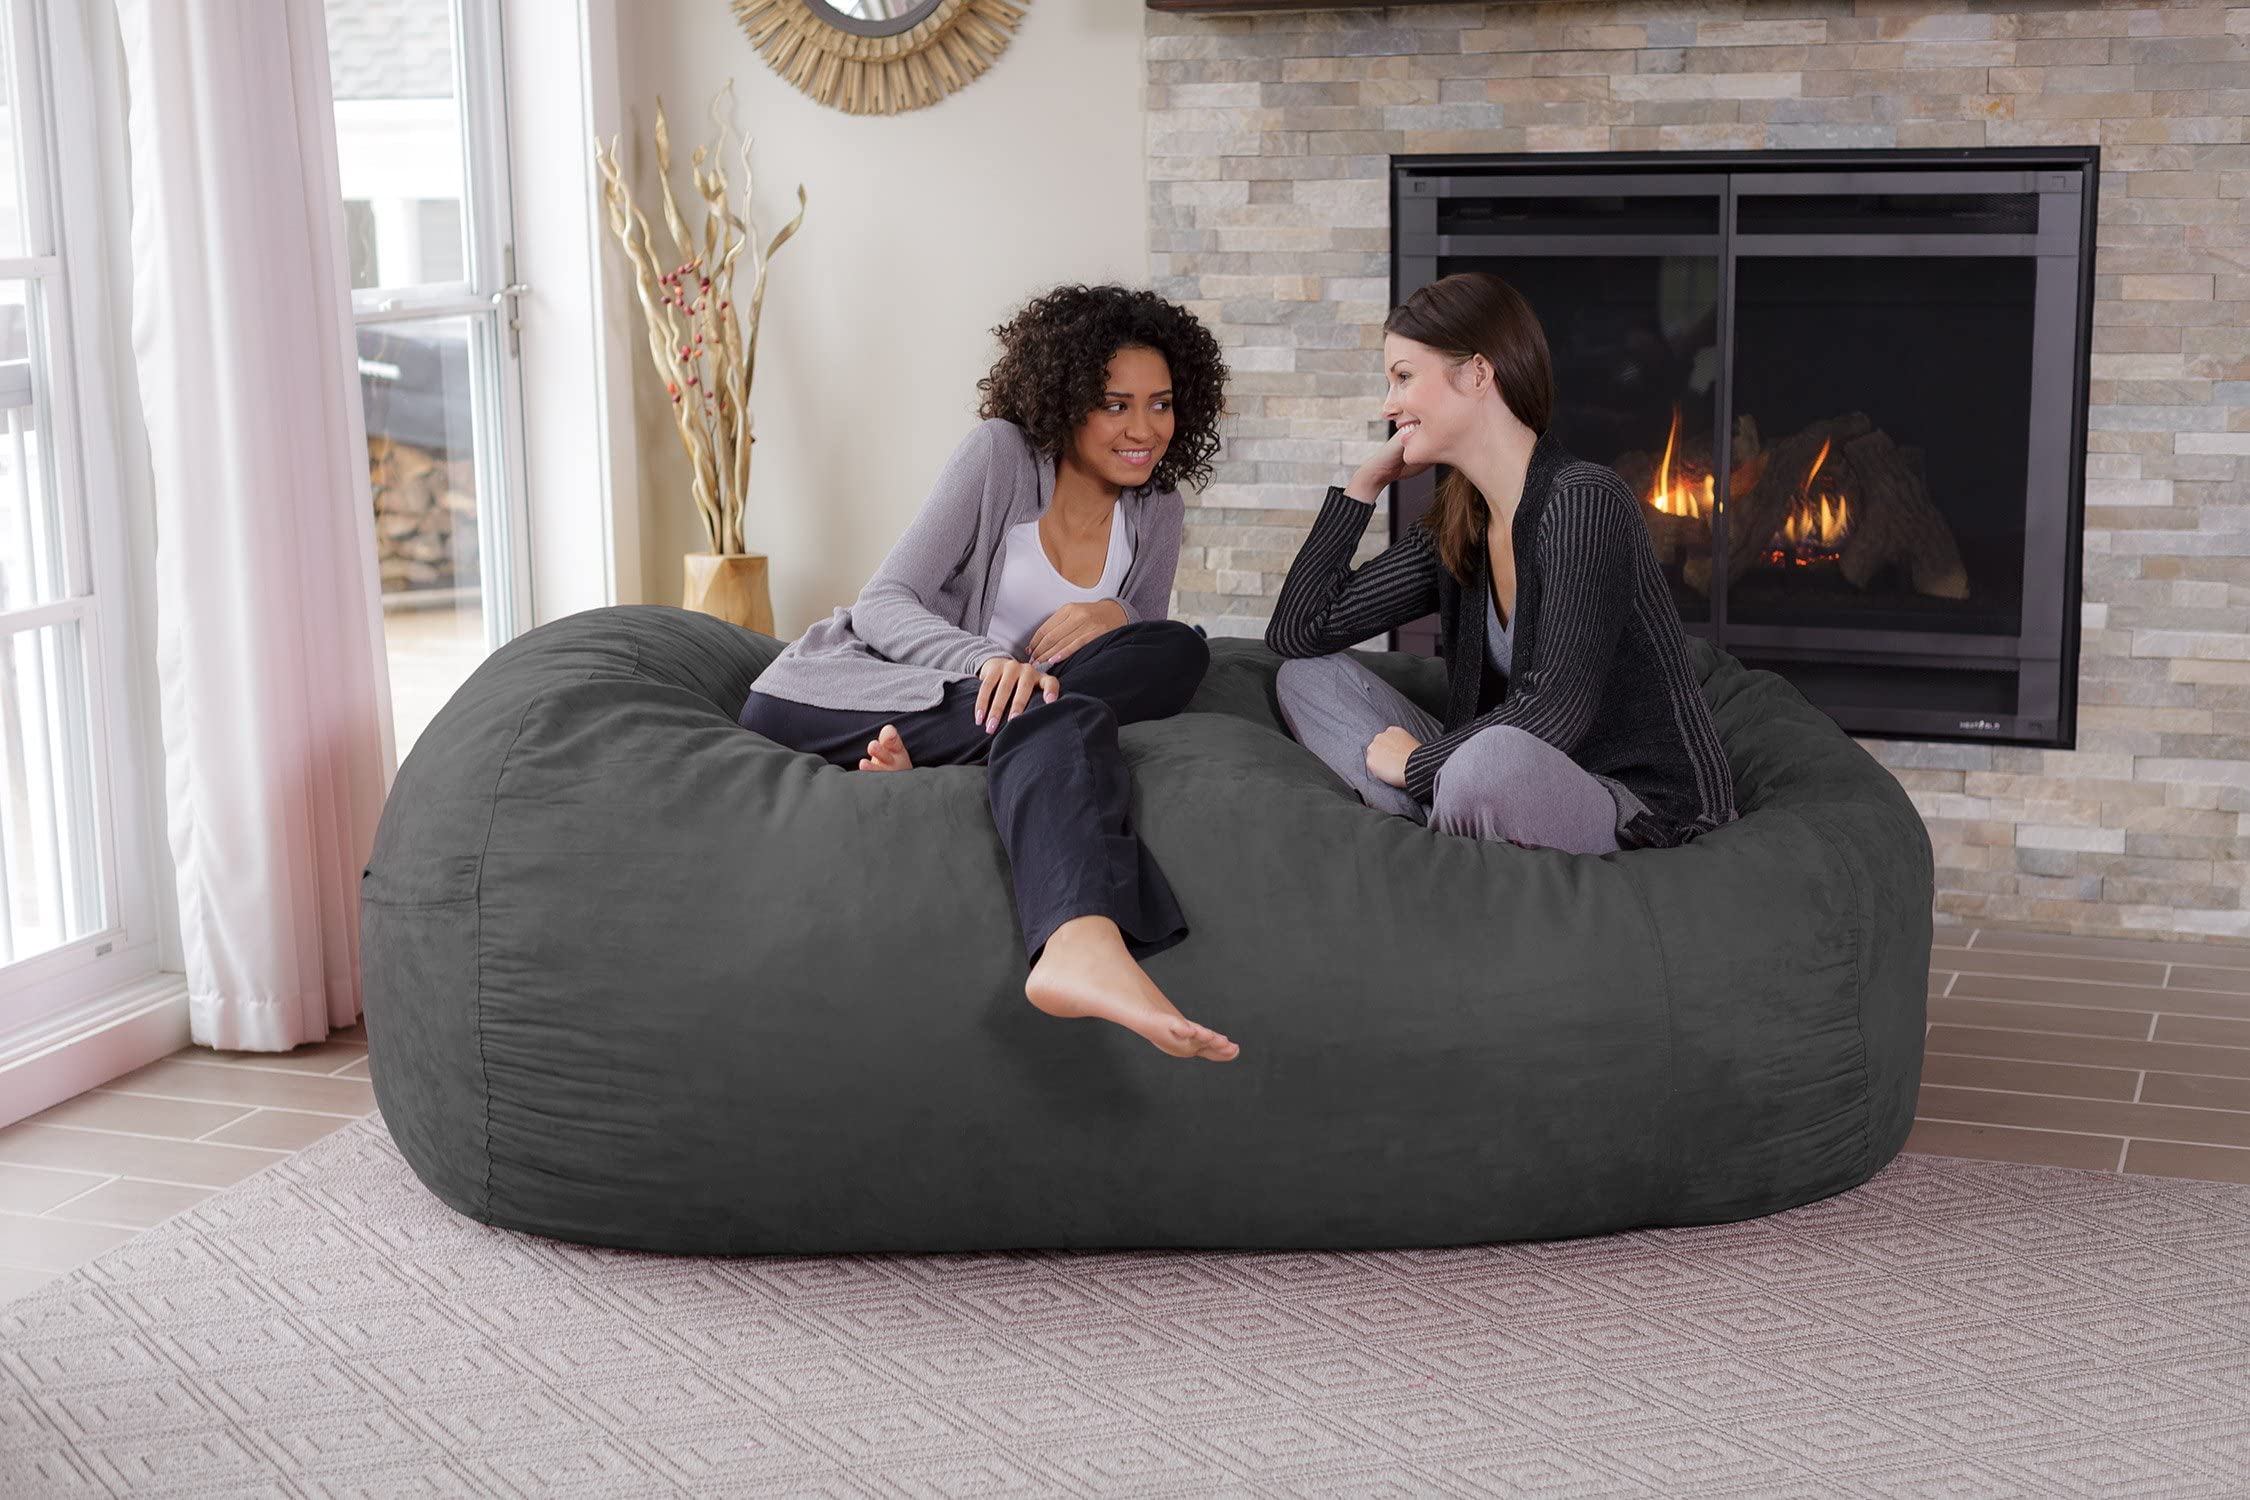 6' Large Bean Bag Lounger With Memory Foam Filling And Washable Cover Tide  Green - Relax Sacks : Target